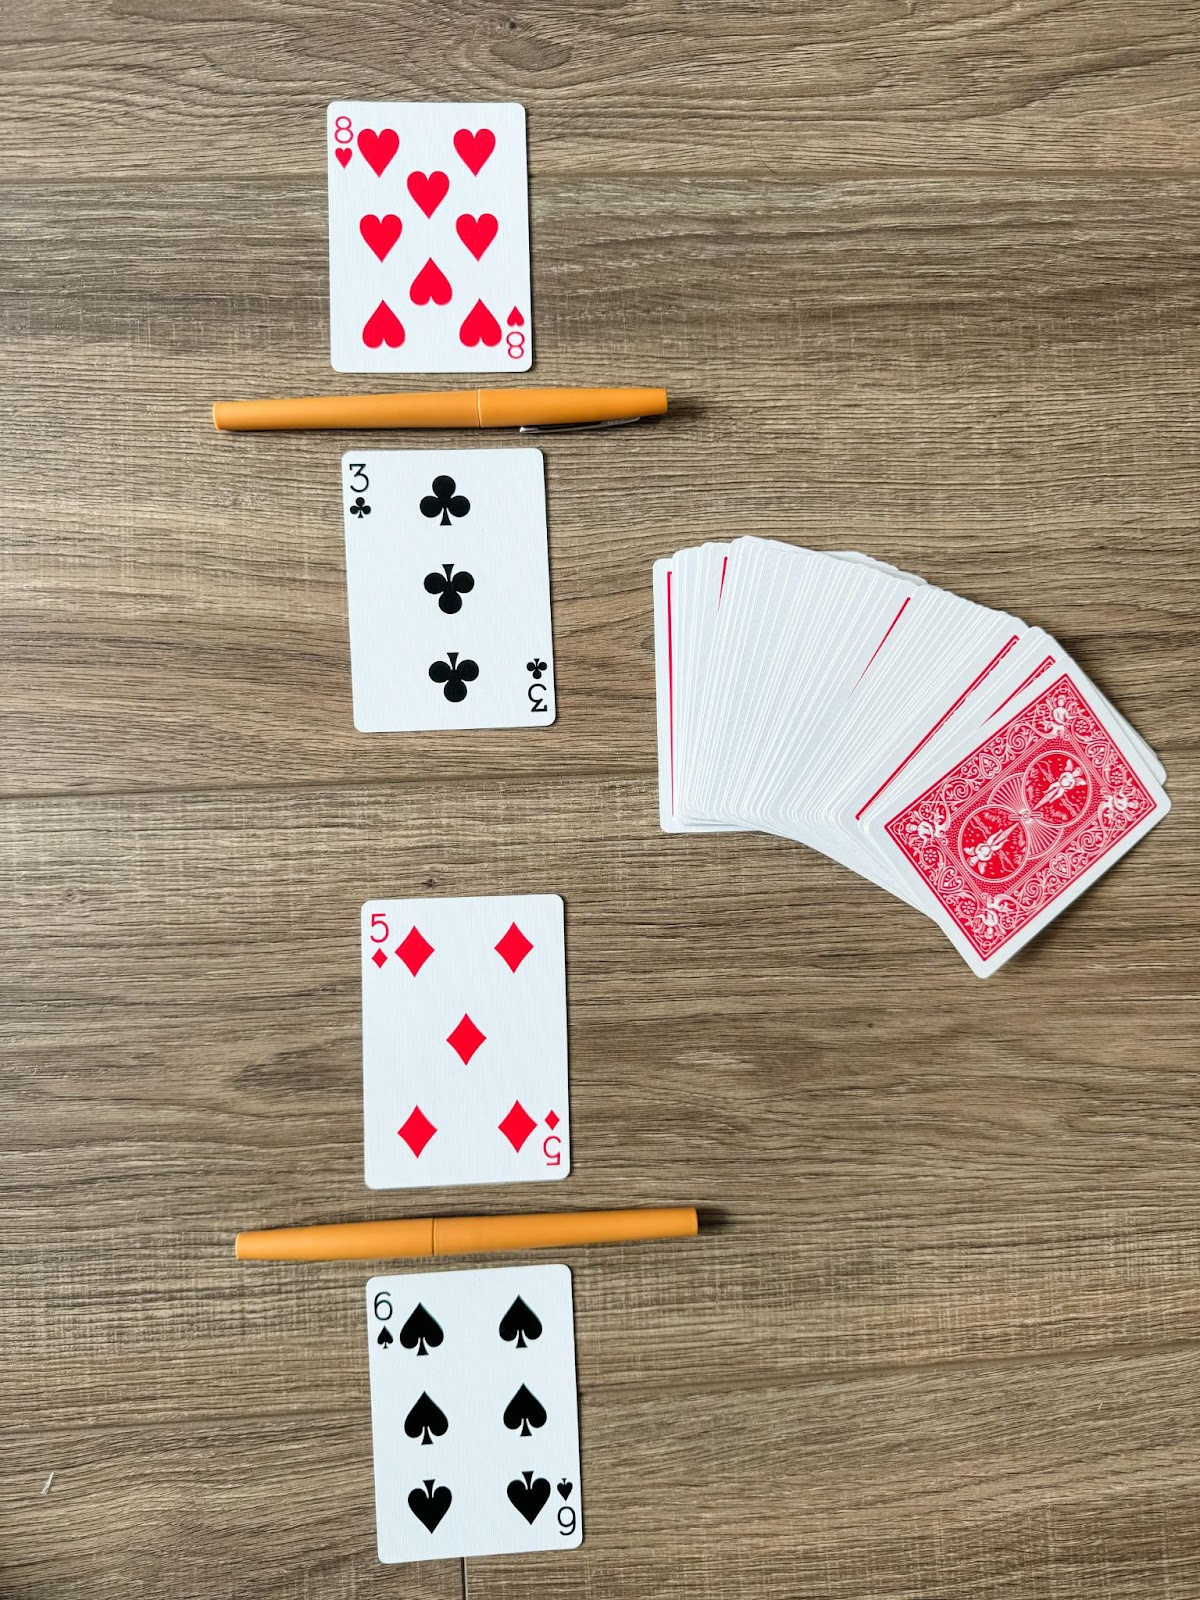 This image shows a deck of cards and four flipped over. The four flipped cards create two different fractions. Two cards are separated by a pen. The fractions are 3/8 and 5/6. 